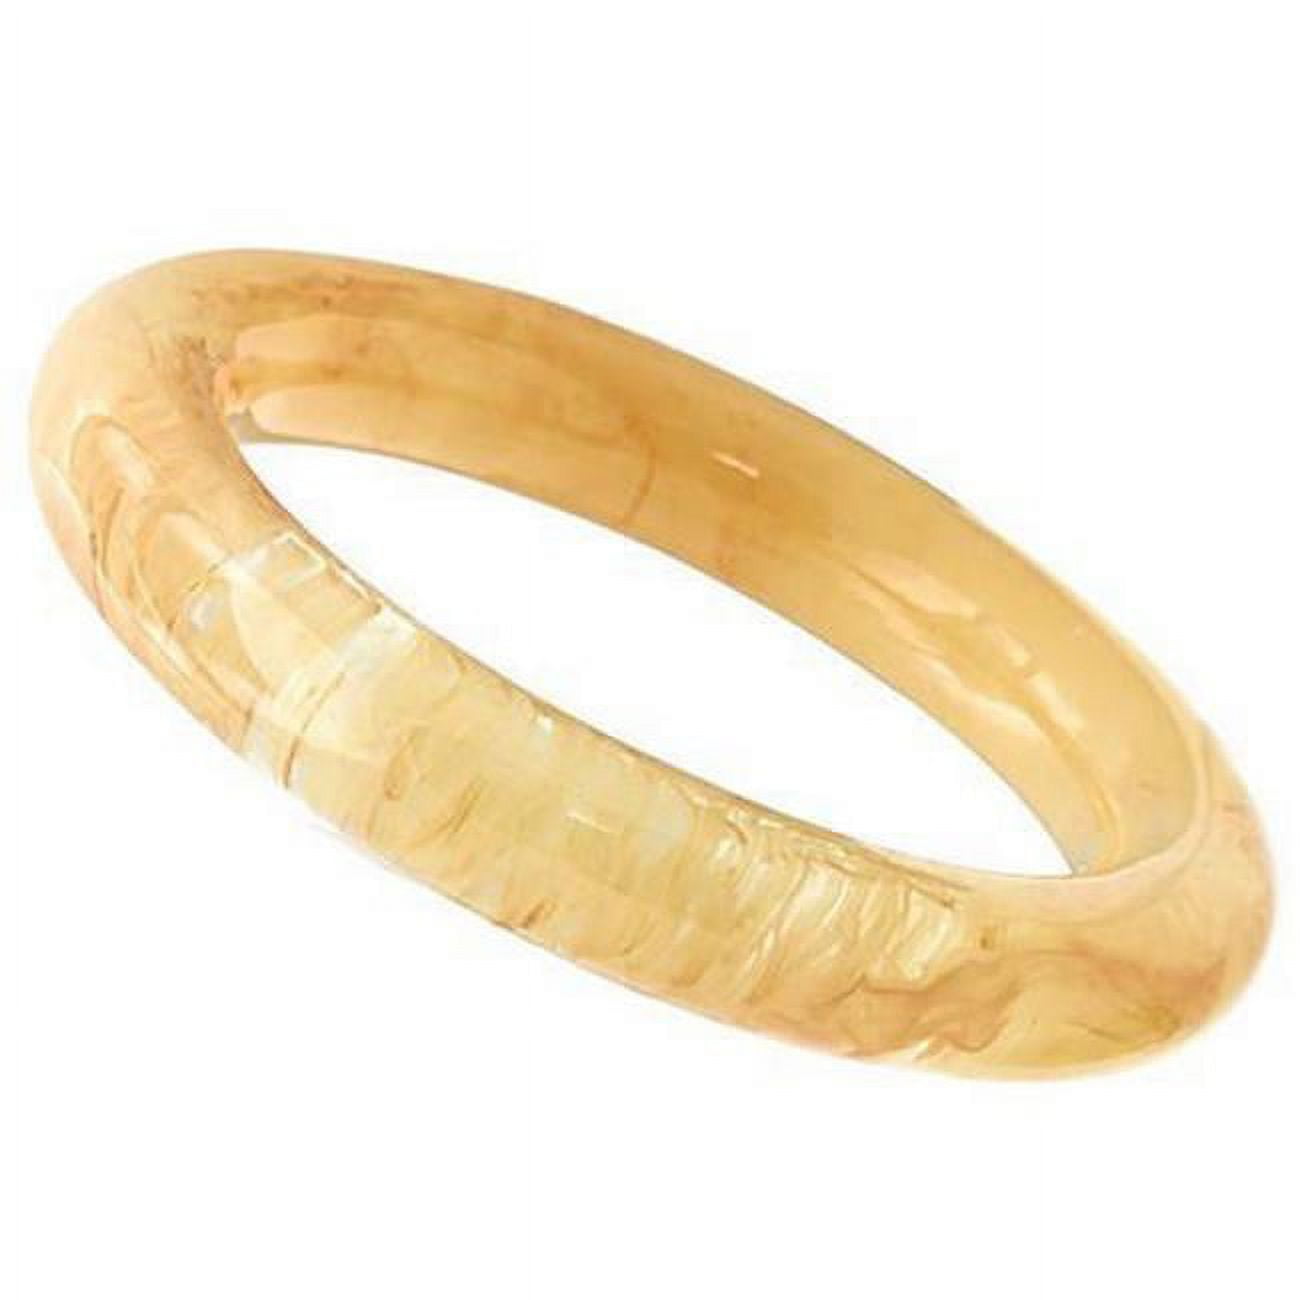 Picture of Alamode VL048-7.25 7.25 in. Resin Bangle with No Stone, Orange